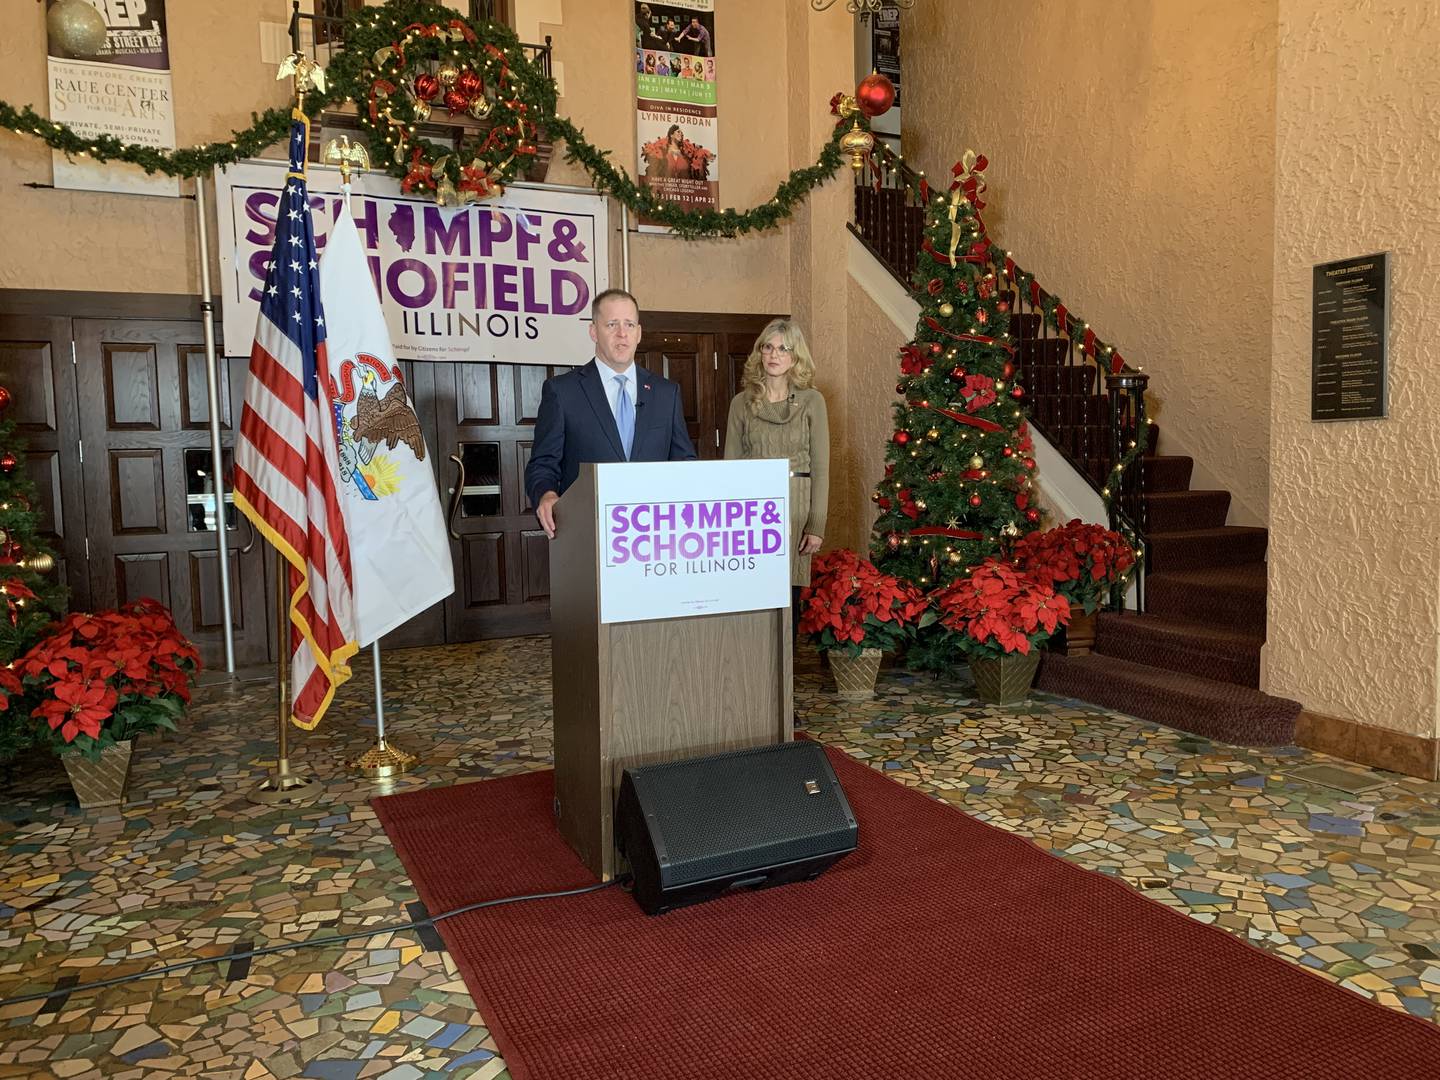 Republican candidate for Illinois governor Paul Schimpf announces McHenry County Board member Carolyn Schofield, R-Crystal Lake, as his running mate at a campaign event in Crystal Lake, Tuesday, Jan. 11, 2022.